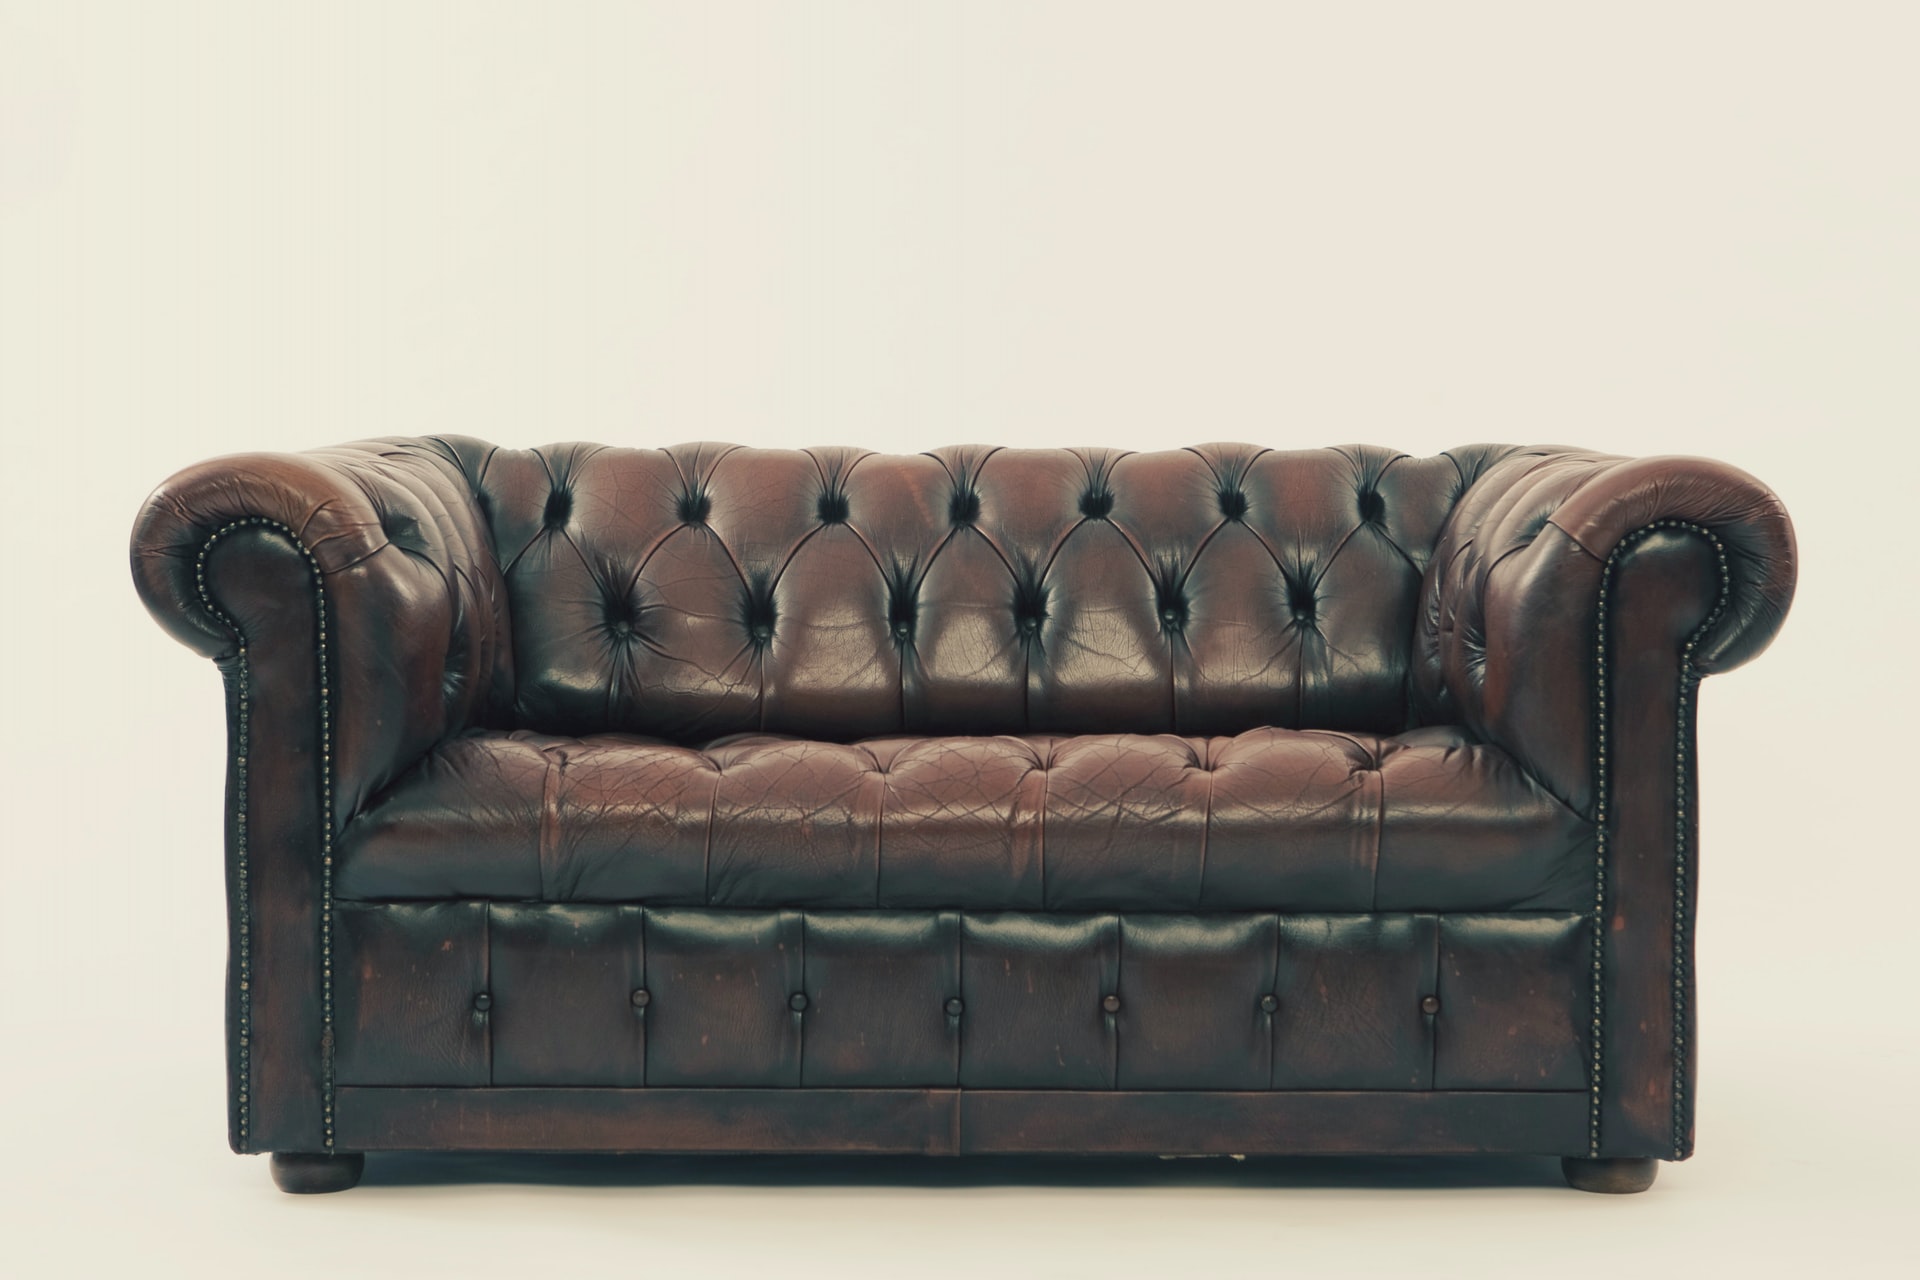 A brown Chesterfield leather couch